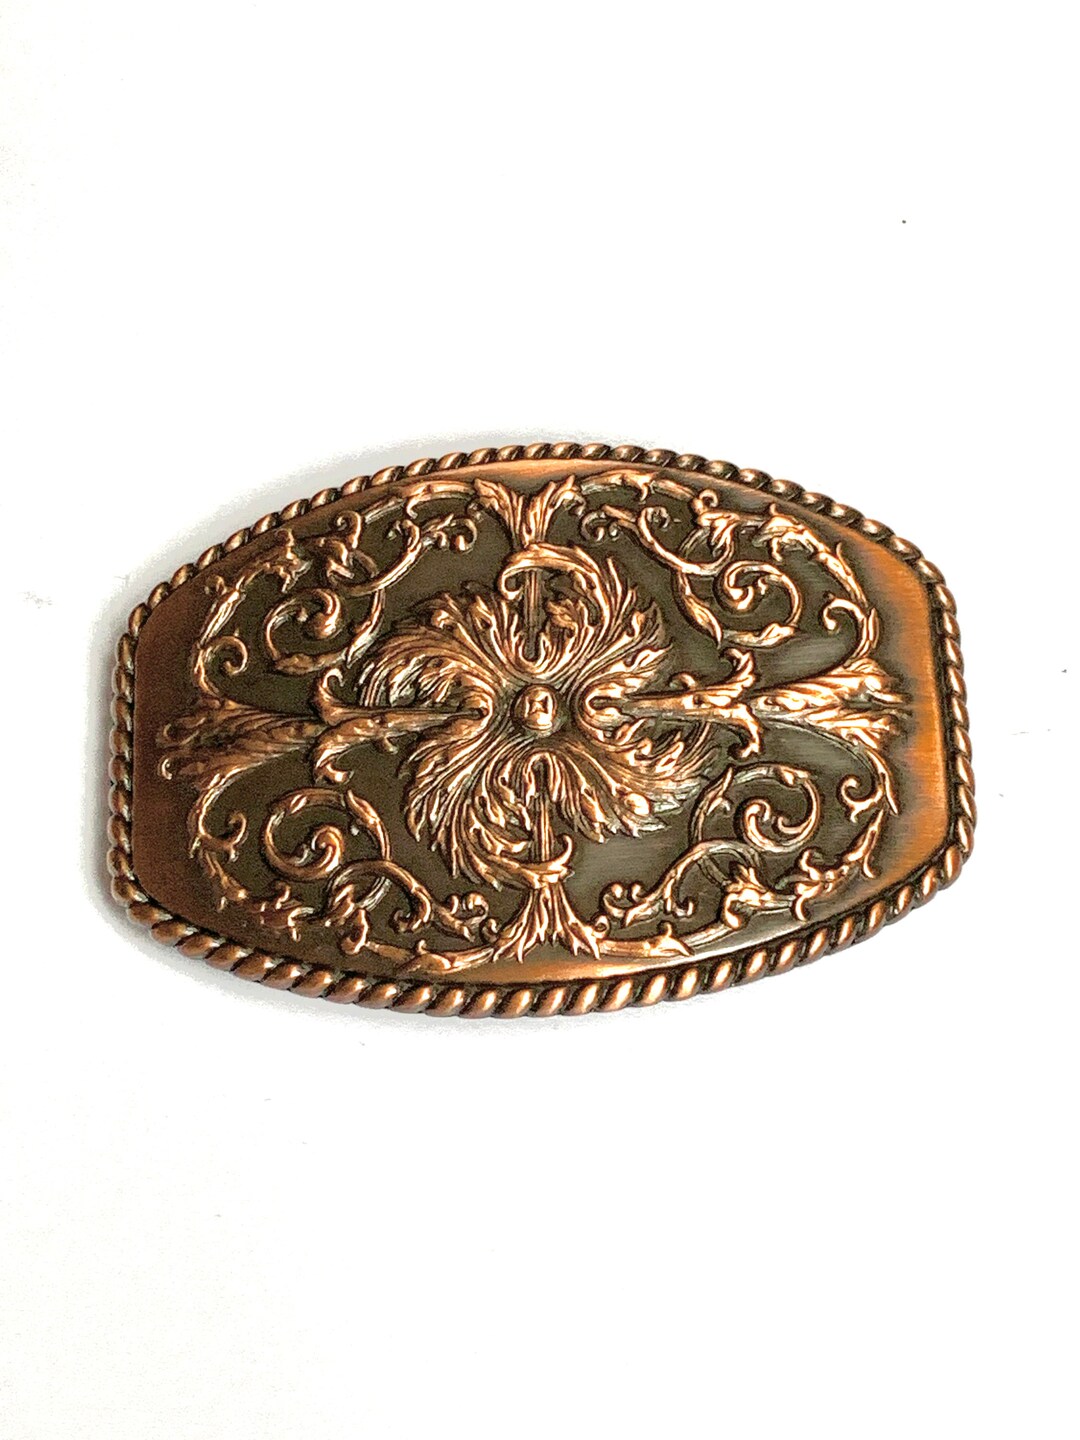 Copper Finish Belt Buckle for Belt Strap up to 1.5 Inches/38 - Etsy